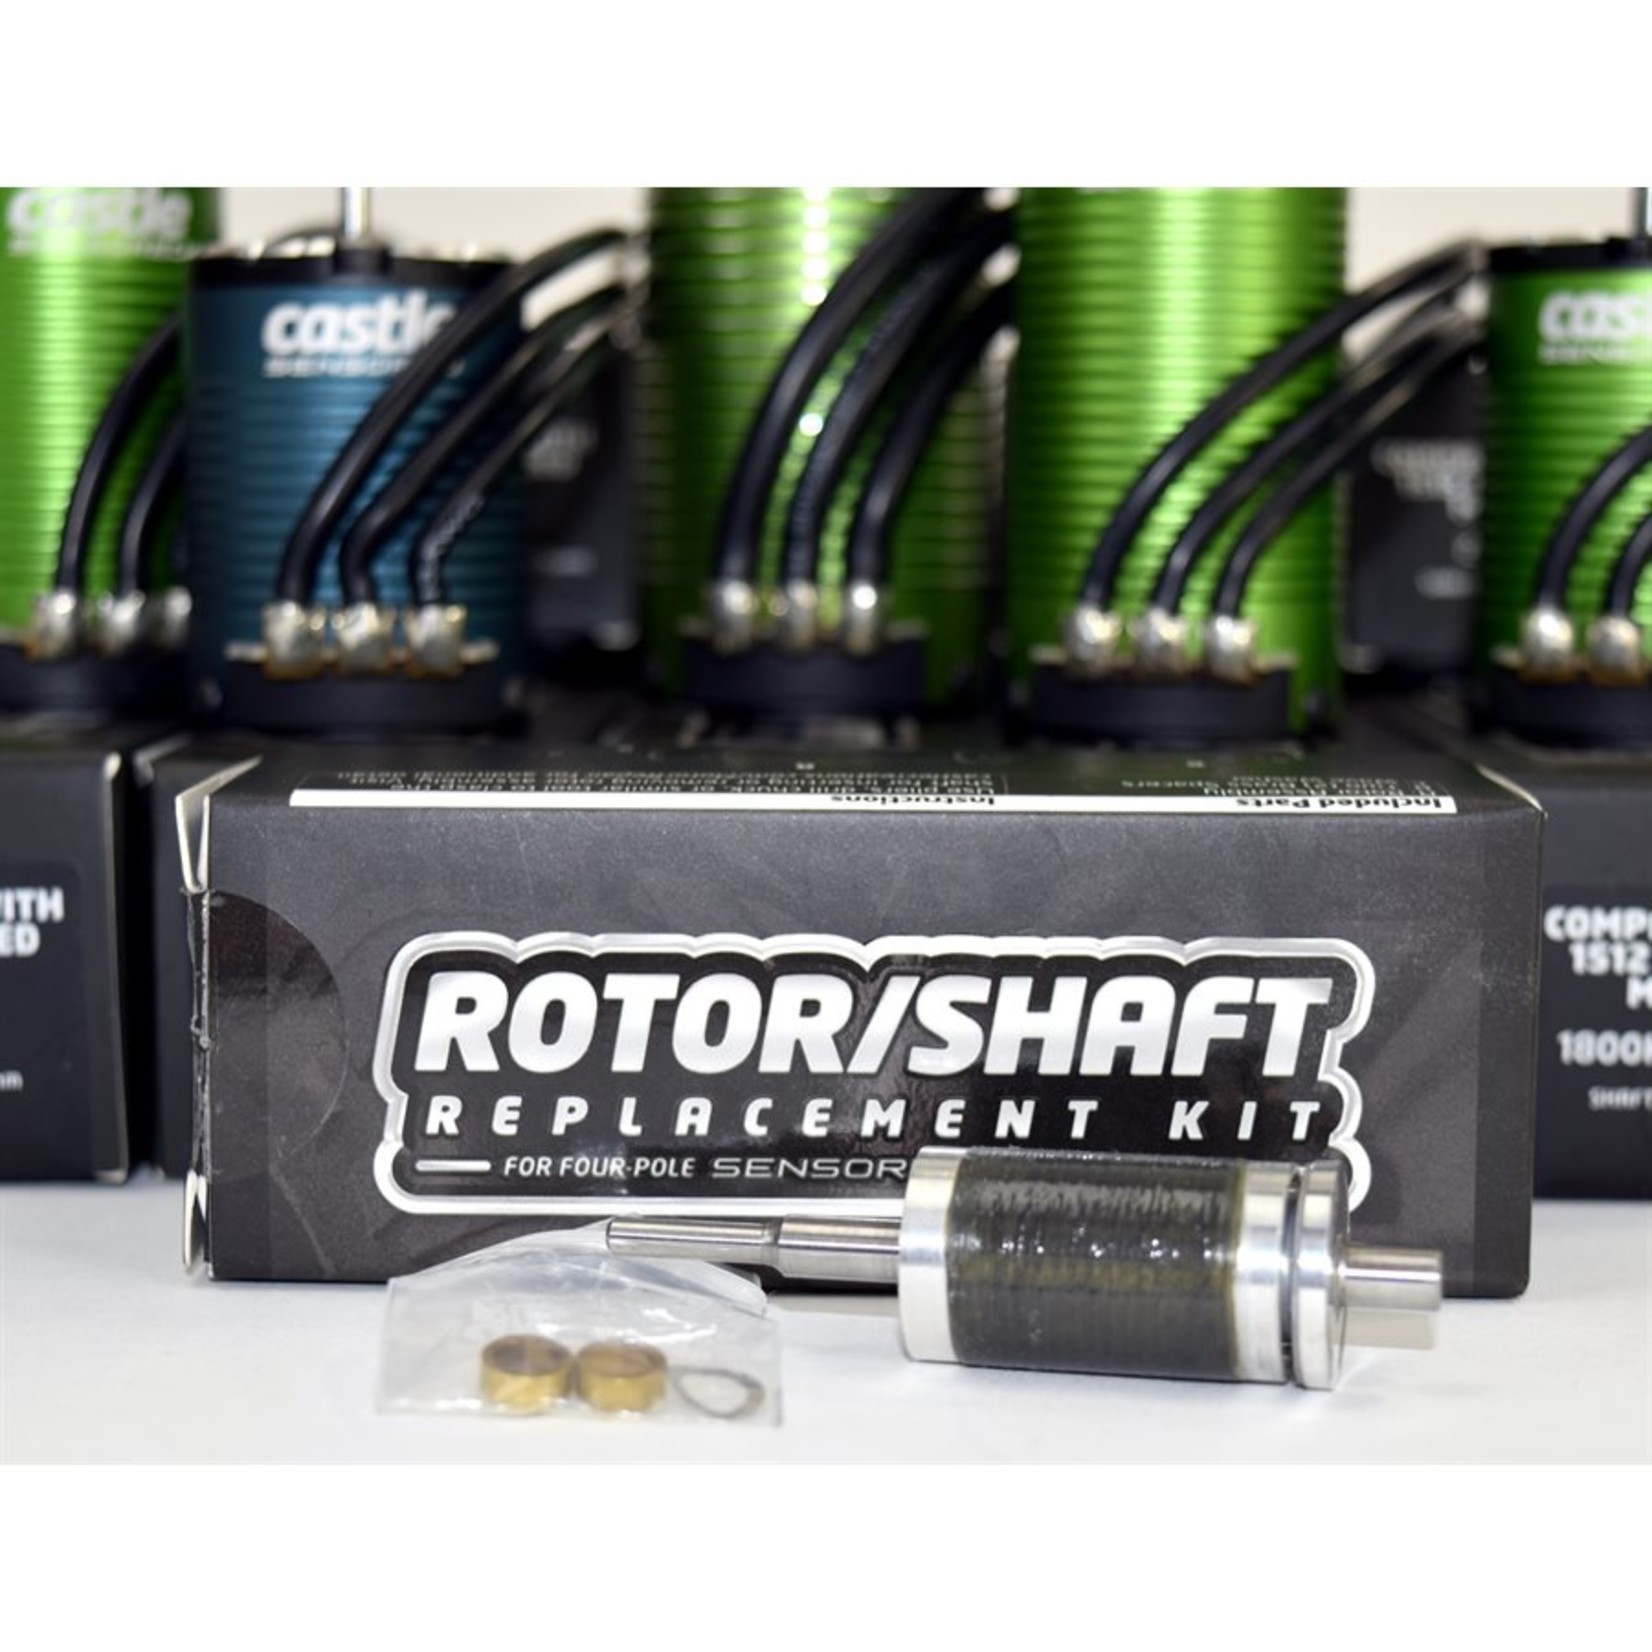 Castle Creations Rotor/Shaft Replacement Kit 1412-3200Kv